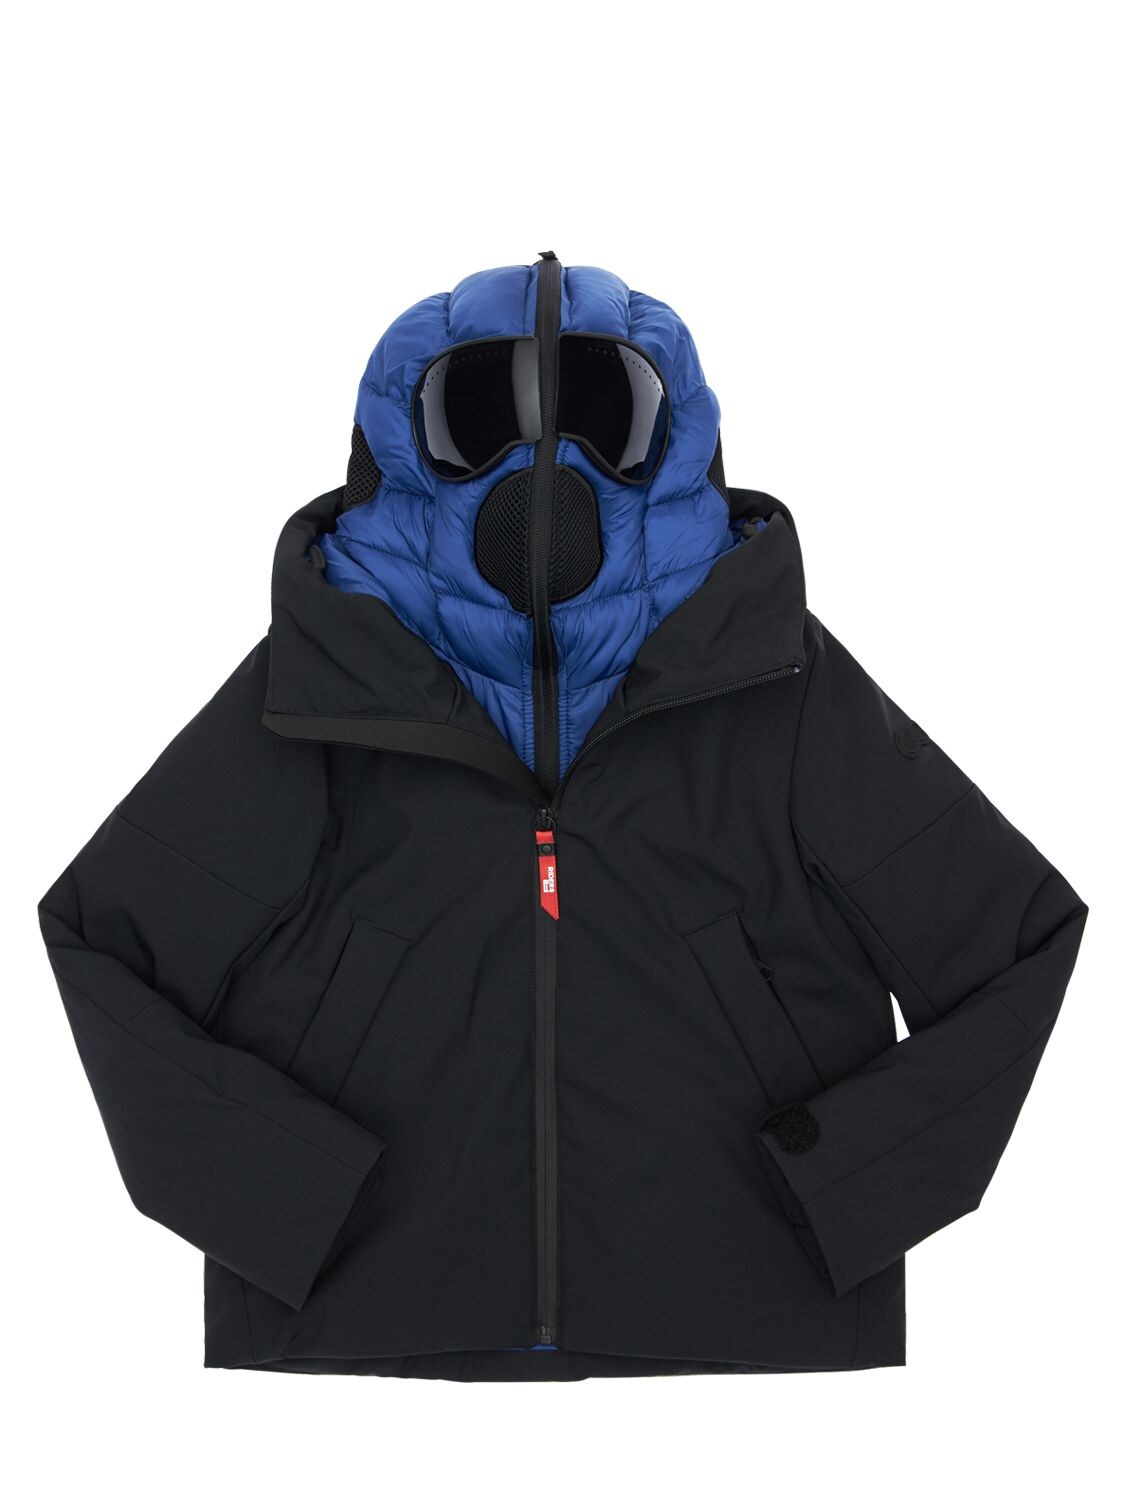 Ai Riders On The Storm Kids' Double Hooded Stretch Primaloft Jacket In Black,blue